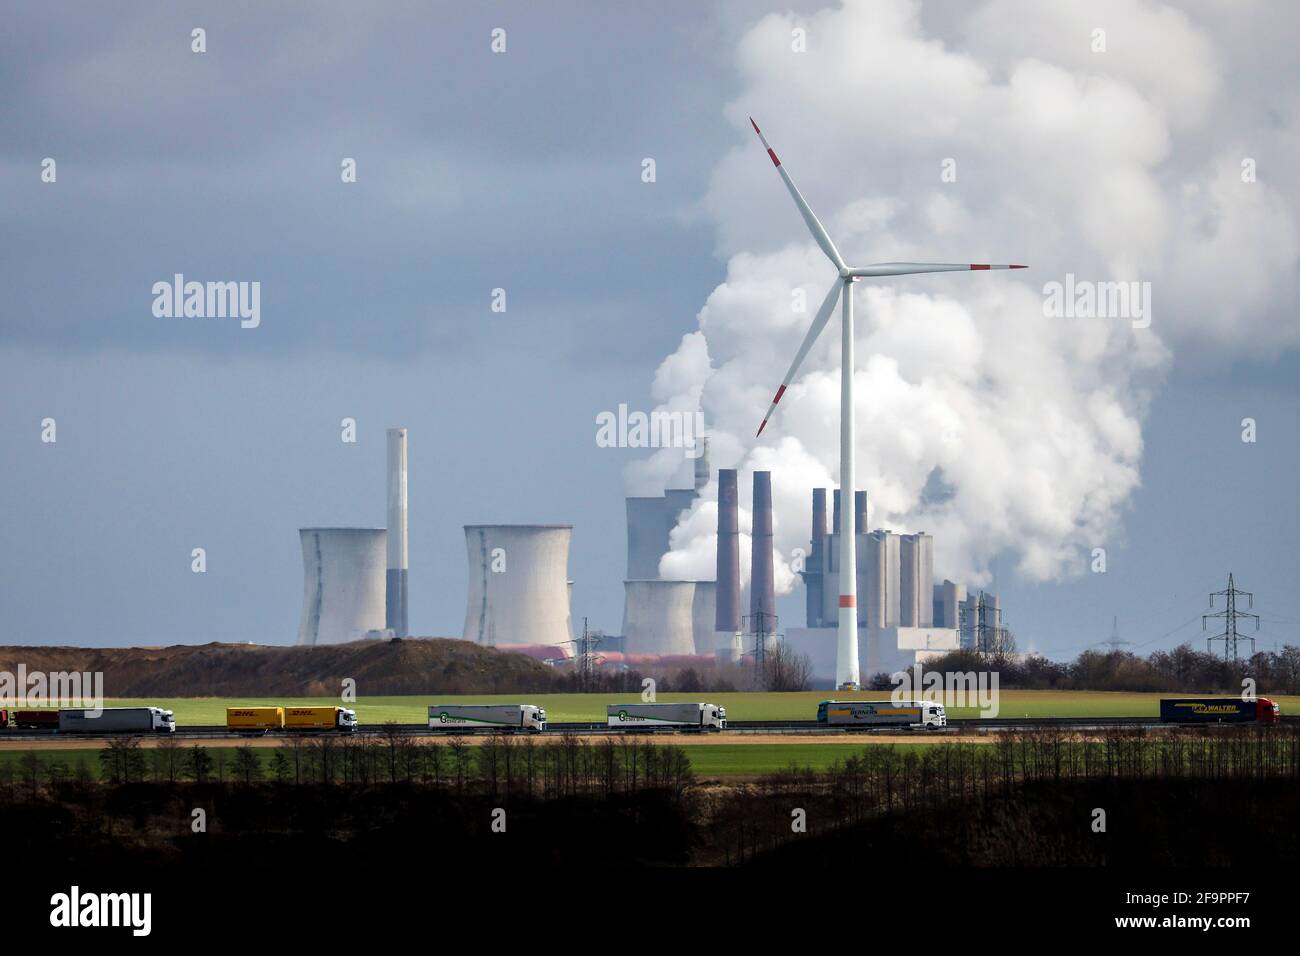 16.03.2021, Grevenbroich, North Rhine-Westphalia, Germany - Truck on freeway A44 and wind farm in front of RWE power plant Neurath, lignite-fired powe Stock Photo